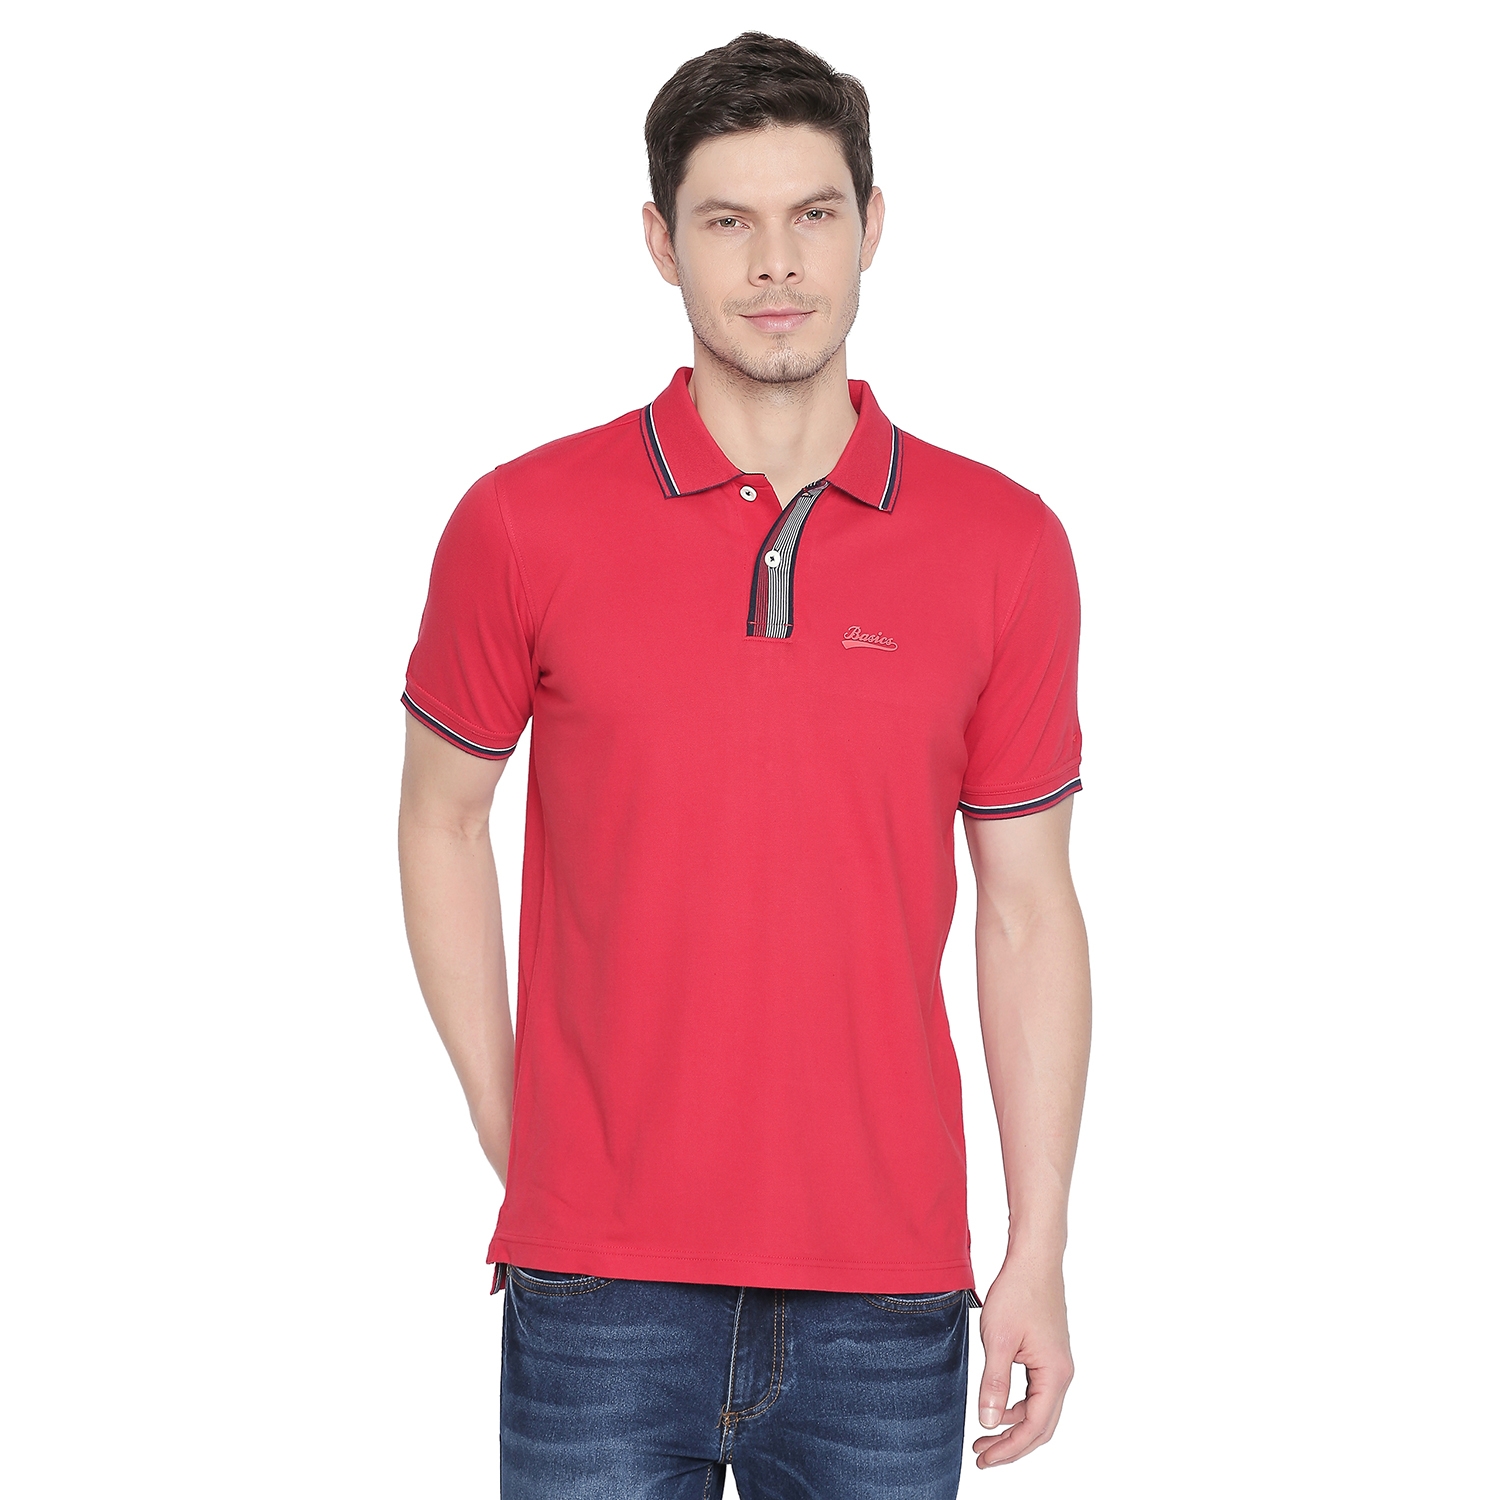 Basics | Basics Muscle Fit High Risk Red Polo Stretch T Shirt